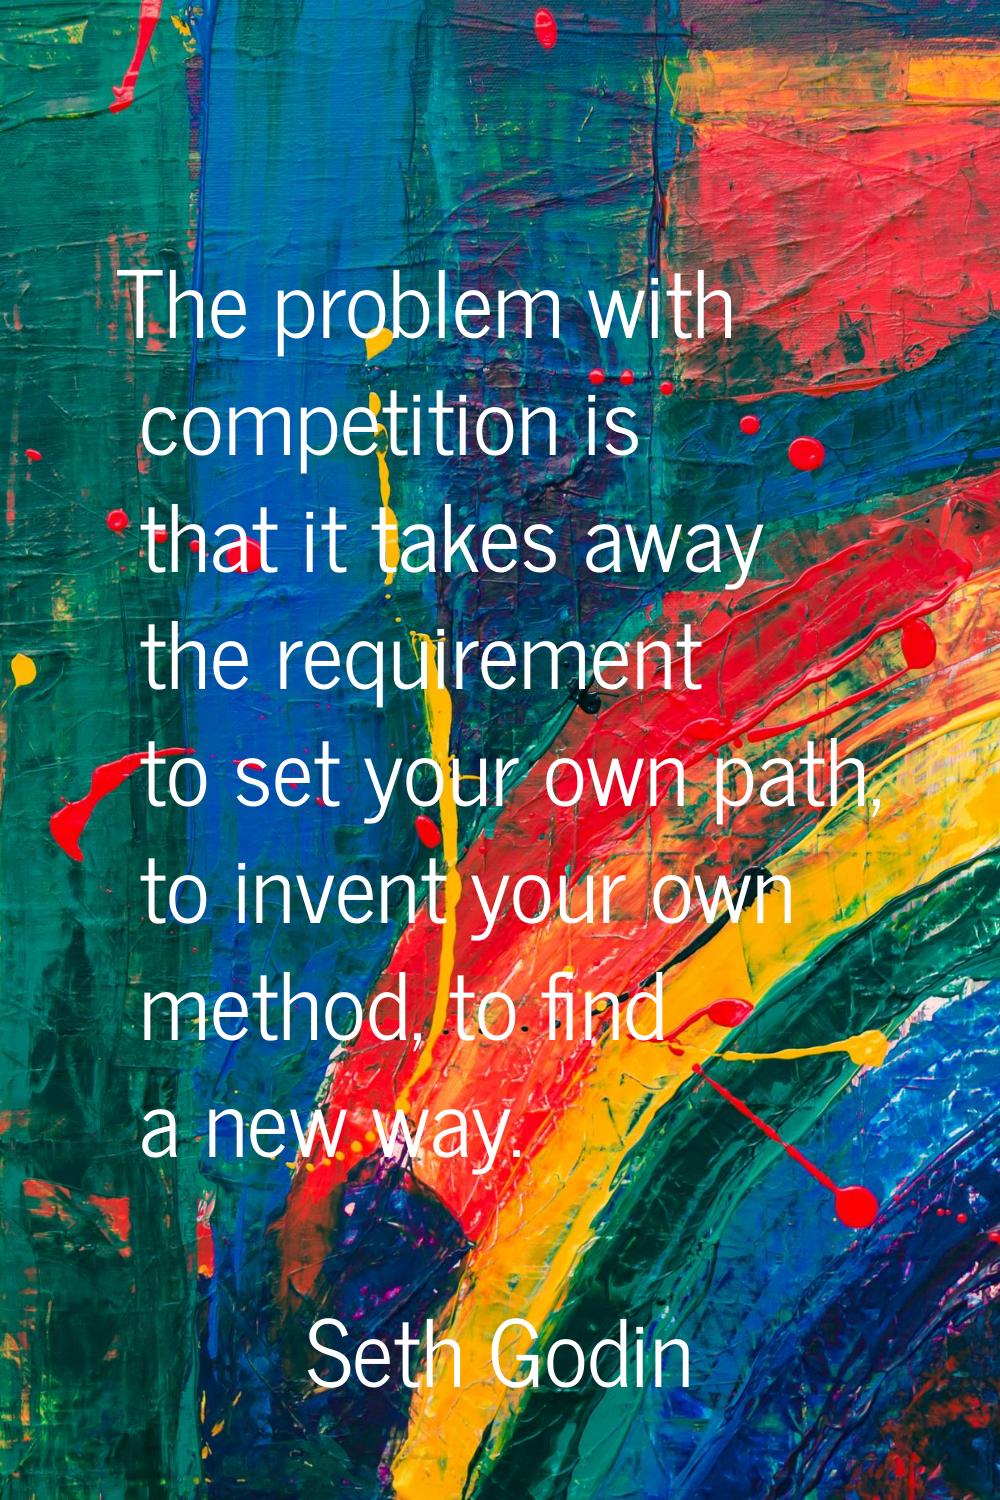 The problem with competition is that it takes away the requirement to set your own path, to invent 